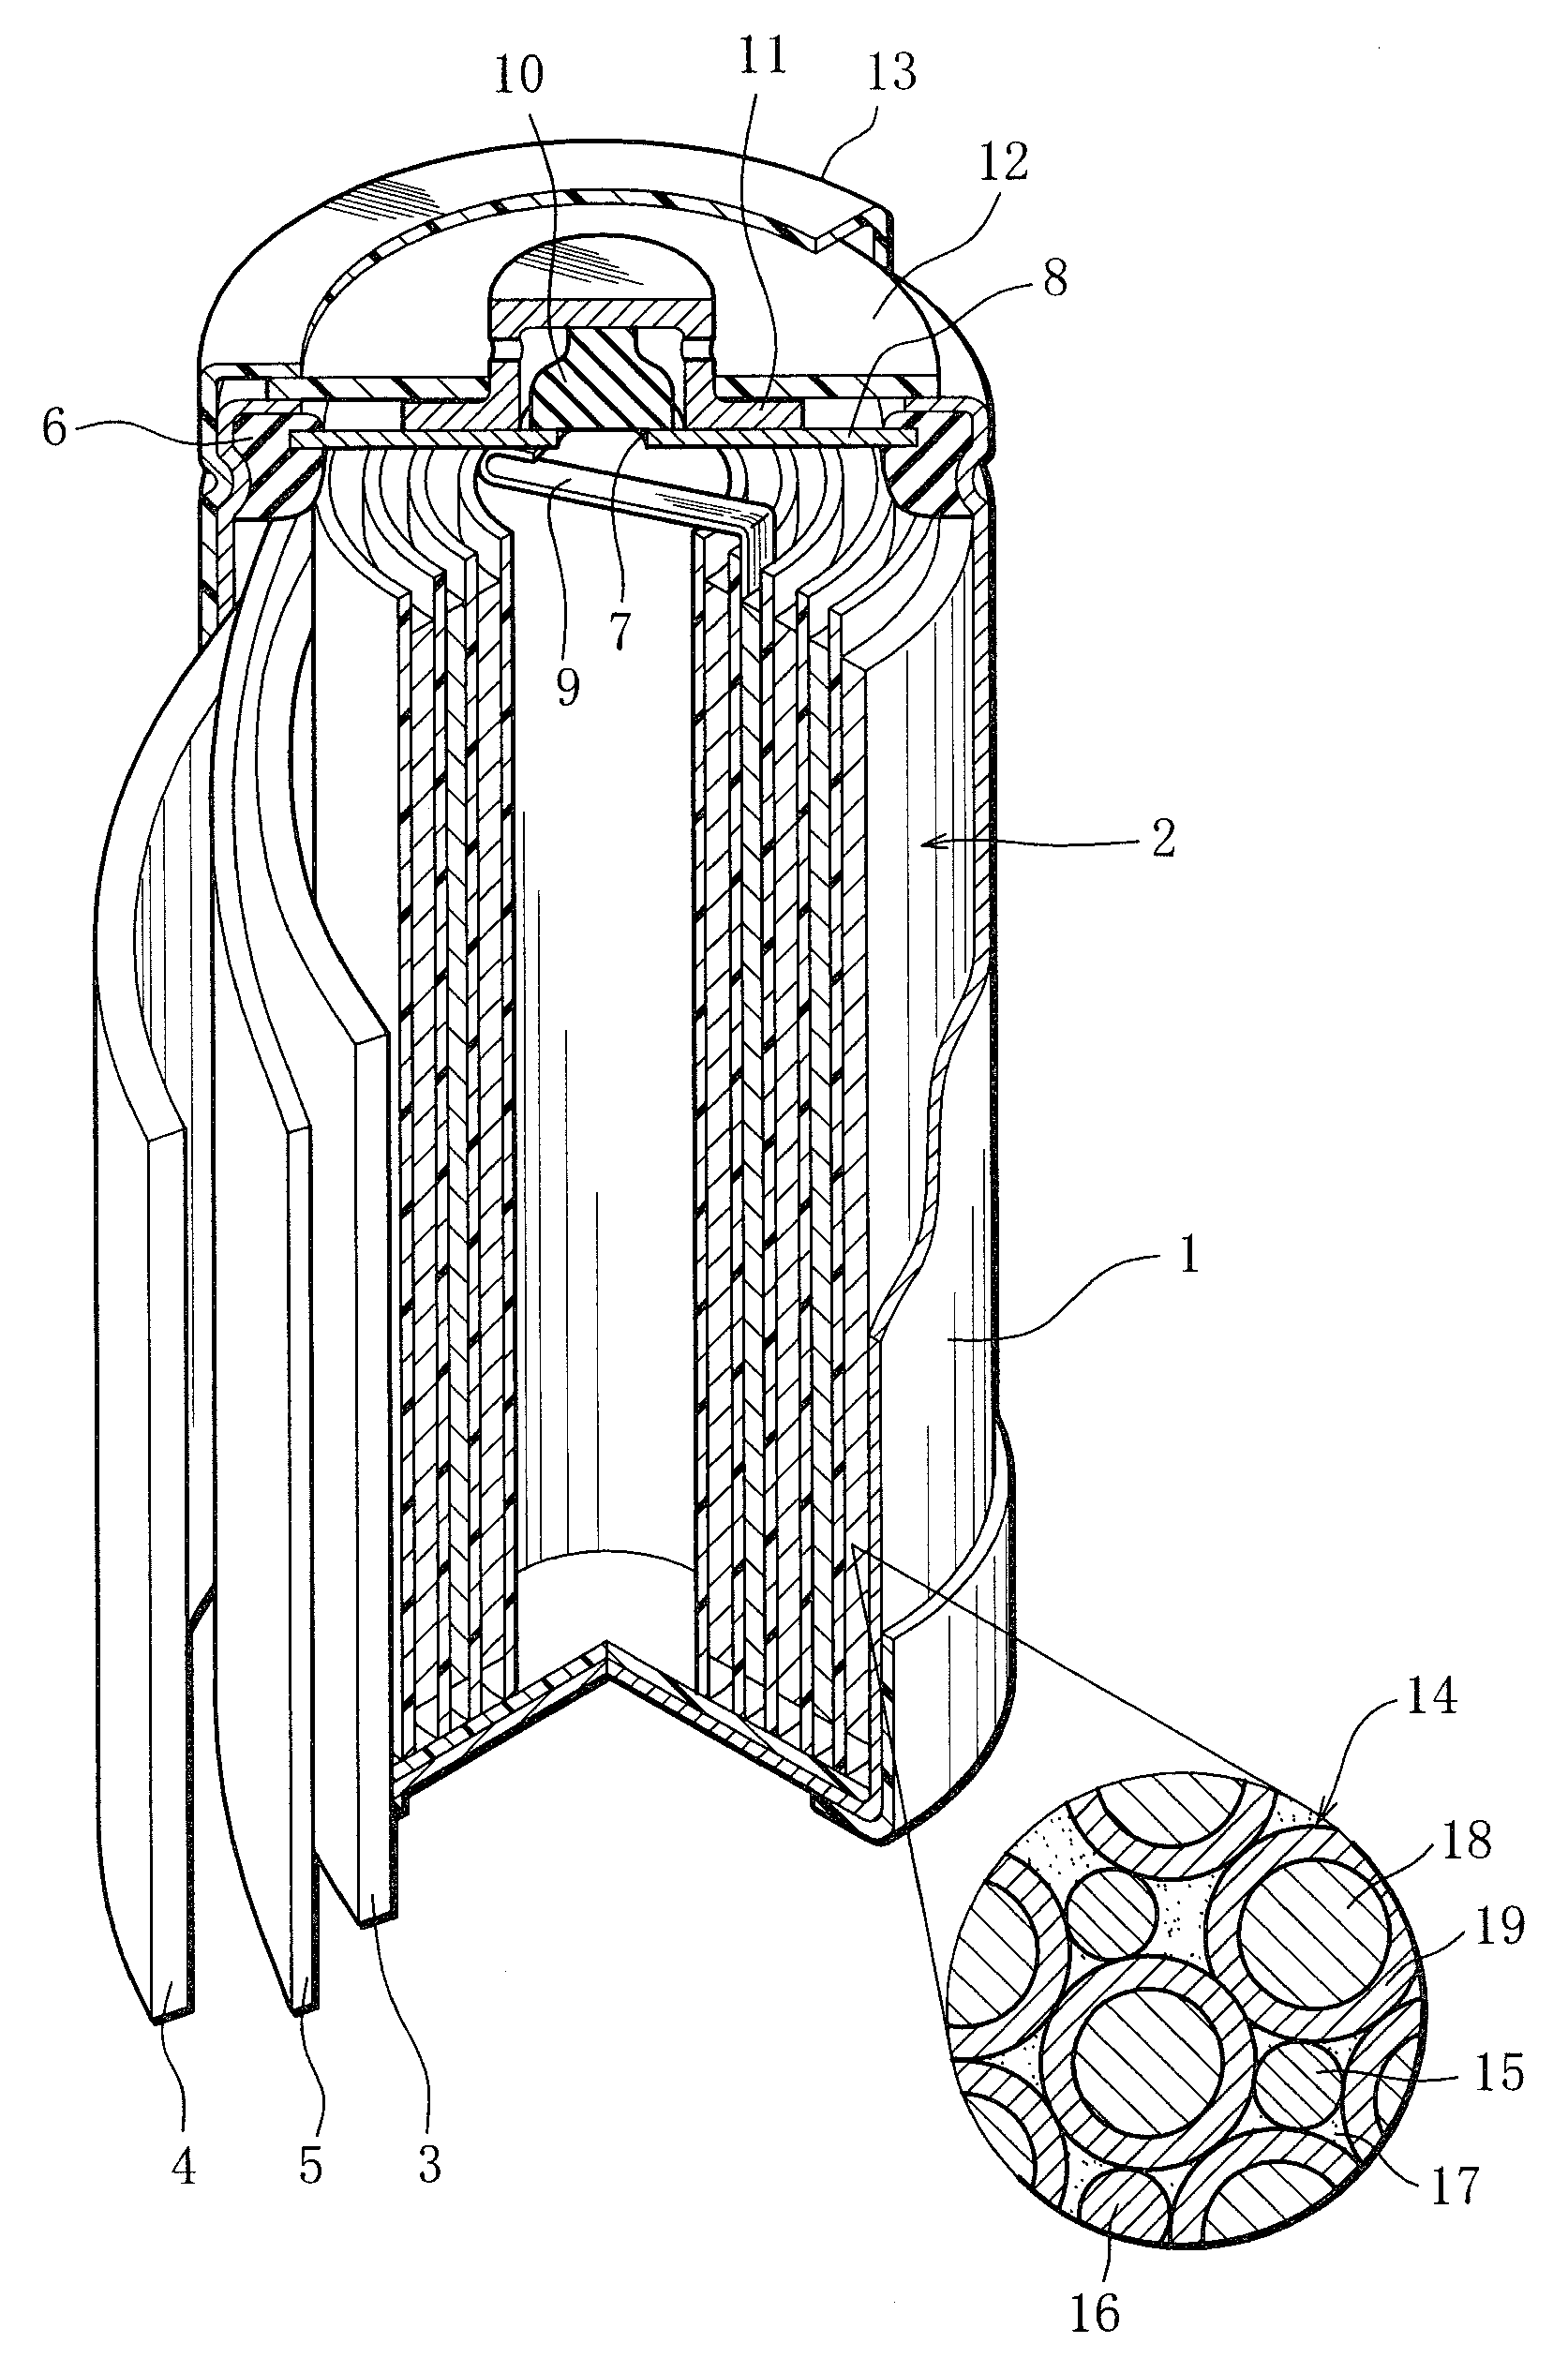 Nickel-metal hydride rechargeable cell